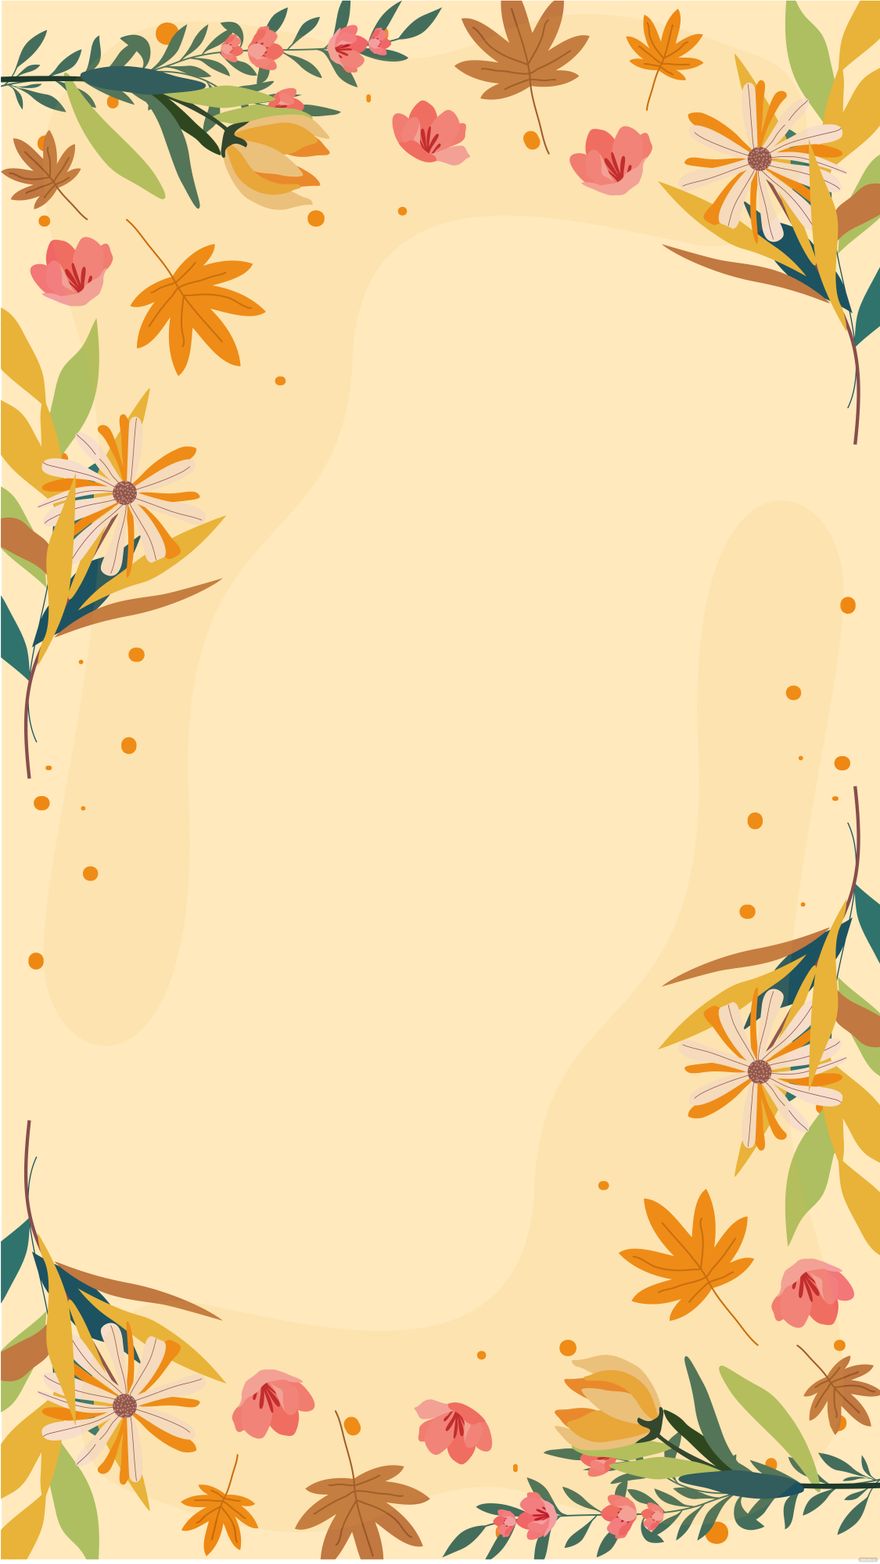 Free Fall Floral Arrangements Background